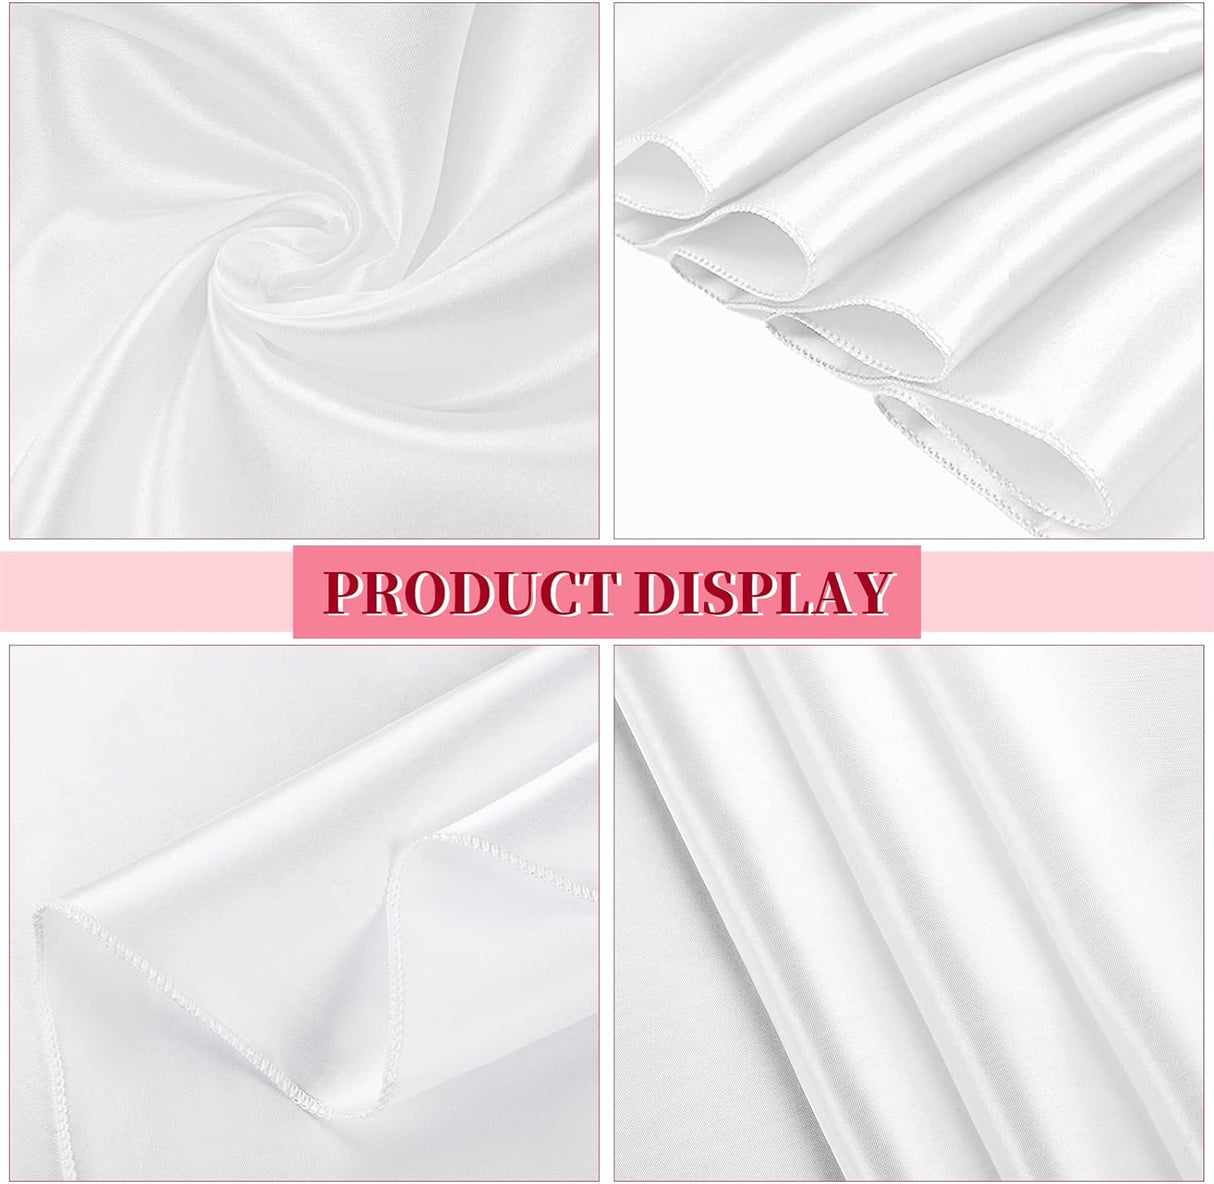 Round Satin Tablecloth 4 PCS Champagne Silky Satin Table Cover Linens 274cm/108Inch for Buffet Table Parties Holiday Dinner Wedding Banquet Decoration